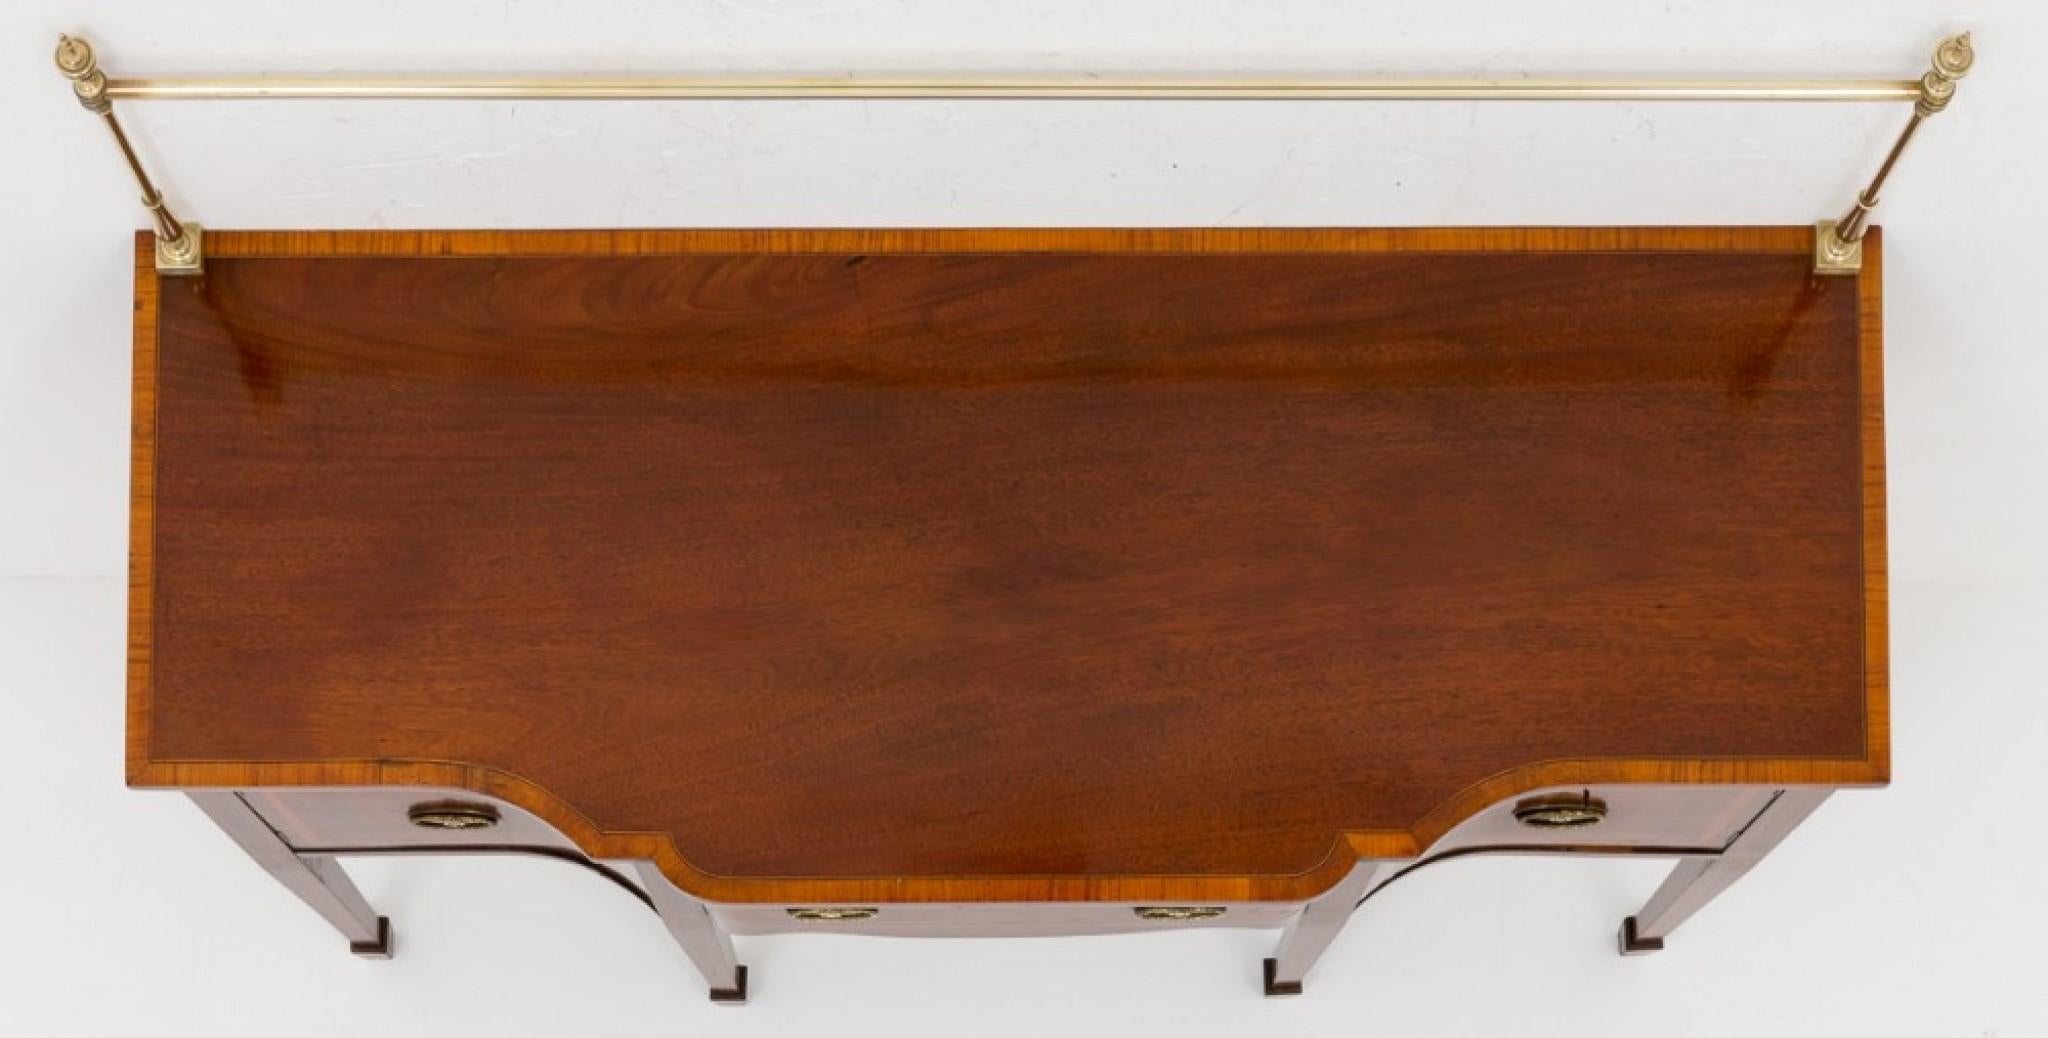 Very Pretty Mahogany Sheraton Revival Sideboard, standing on square tapered legs with spade toes and boxwood inlays.
circa 1880
This piece is of serpentine form.
The central drawer flanked by working cupboards.
The sideboard has satinwood